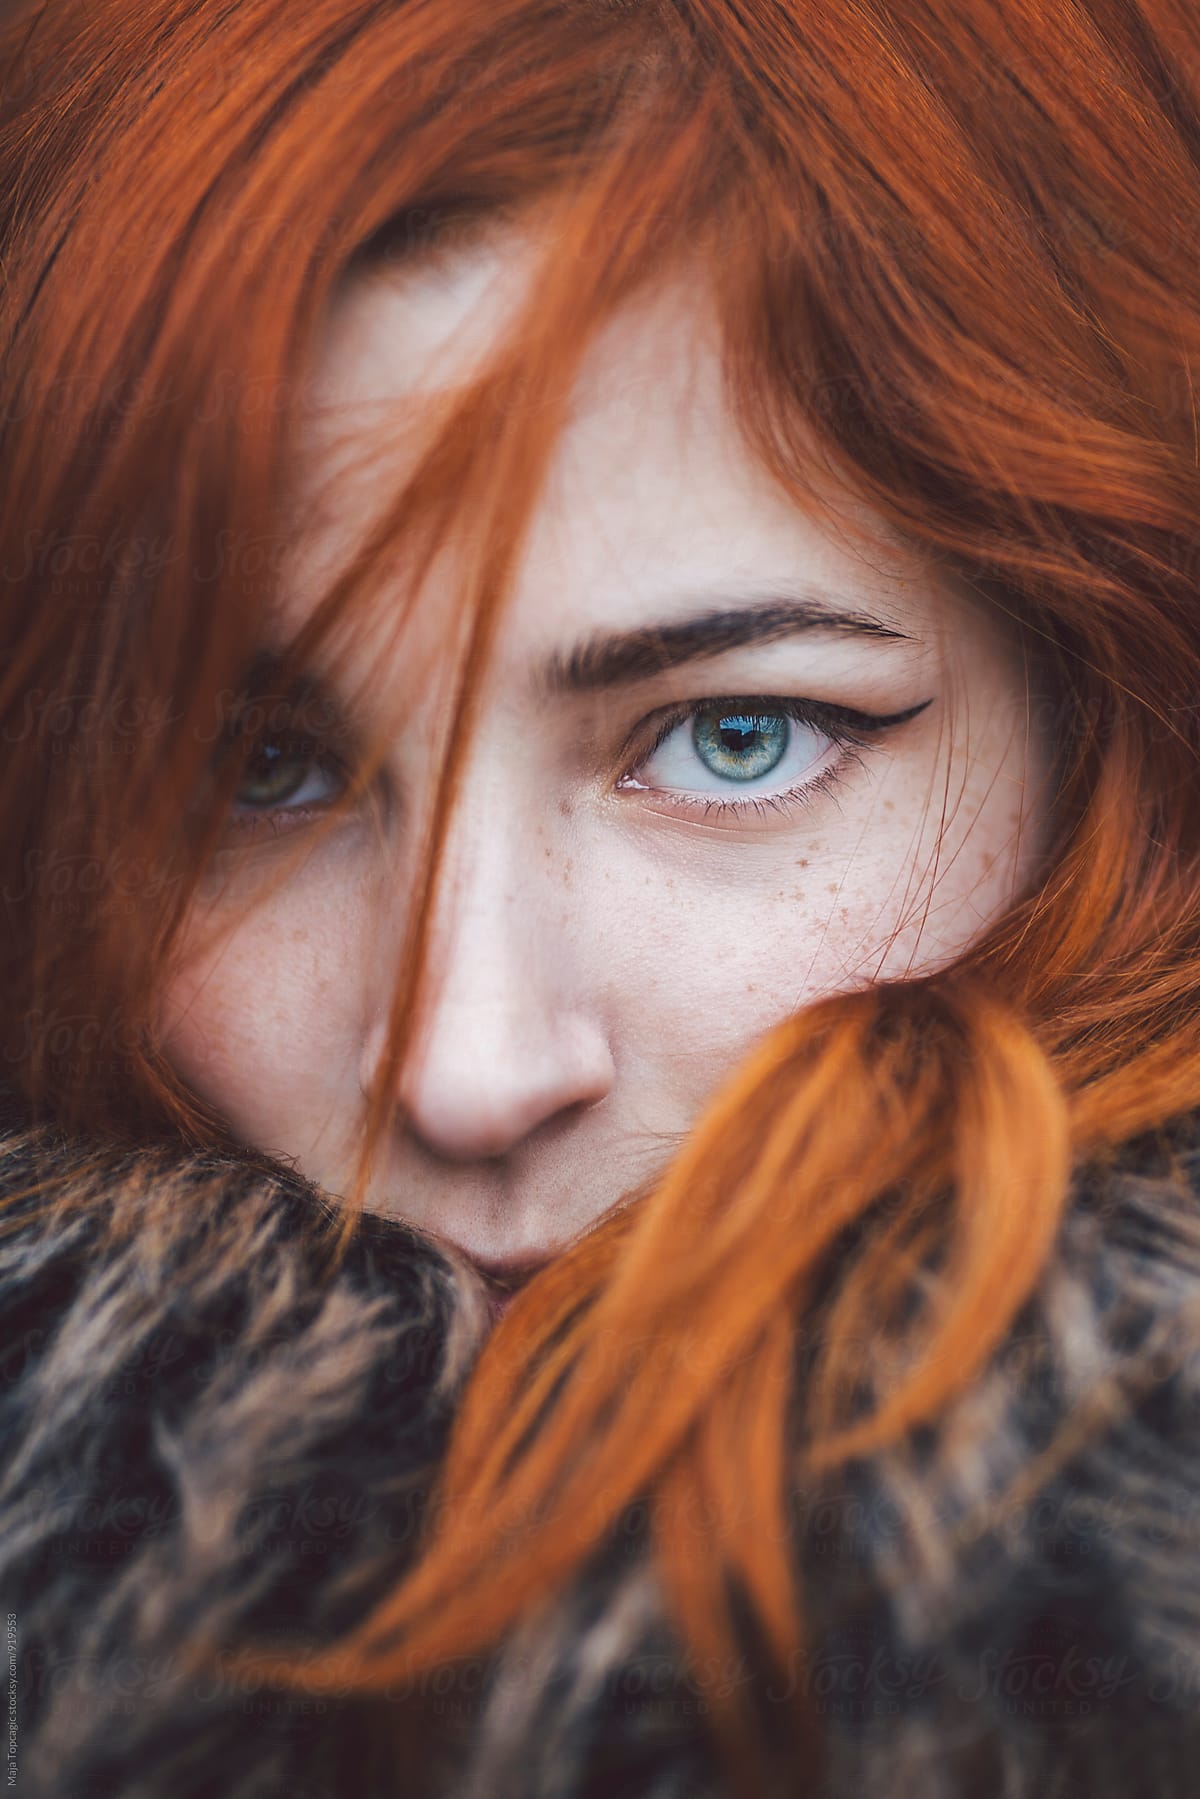 Redhead with freckles pic